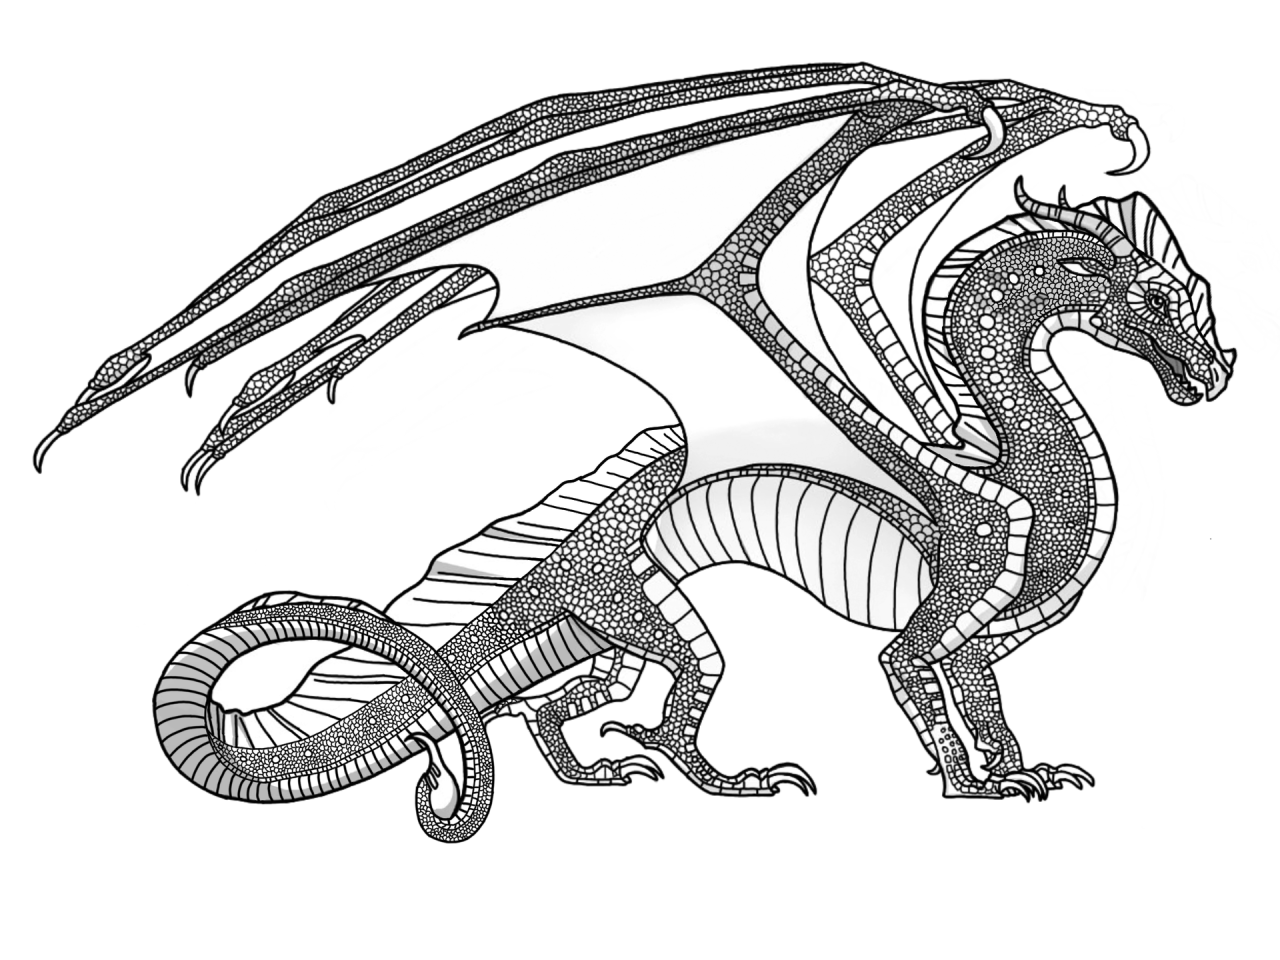 Hybrid Wings Of Fire Dragon Coloring Pages / Fire breathing dragon